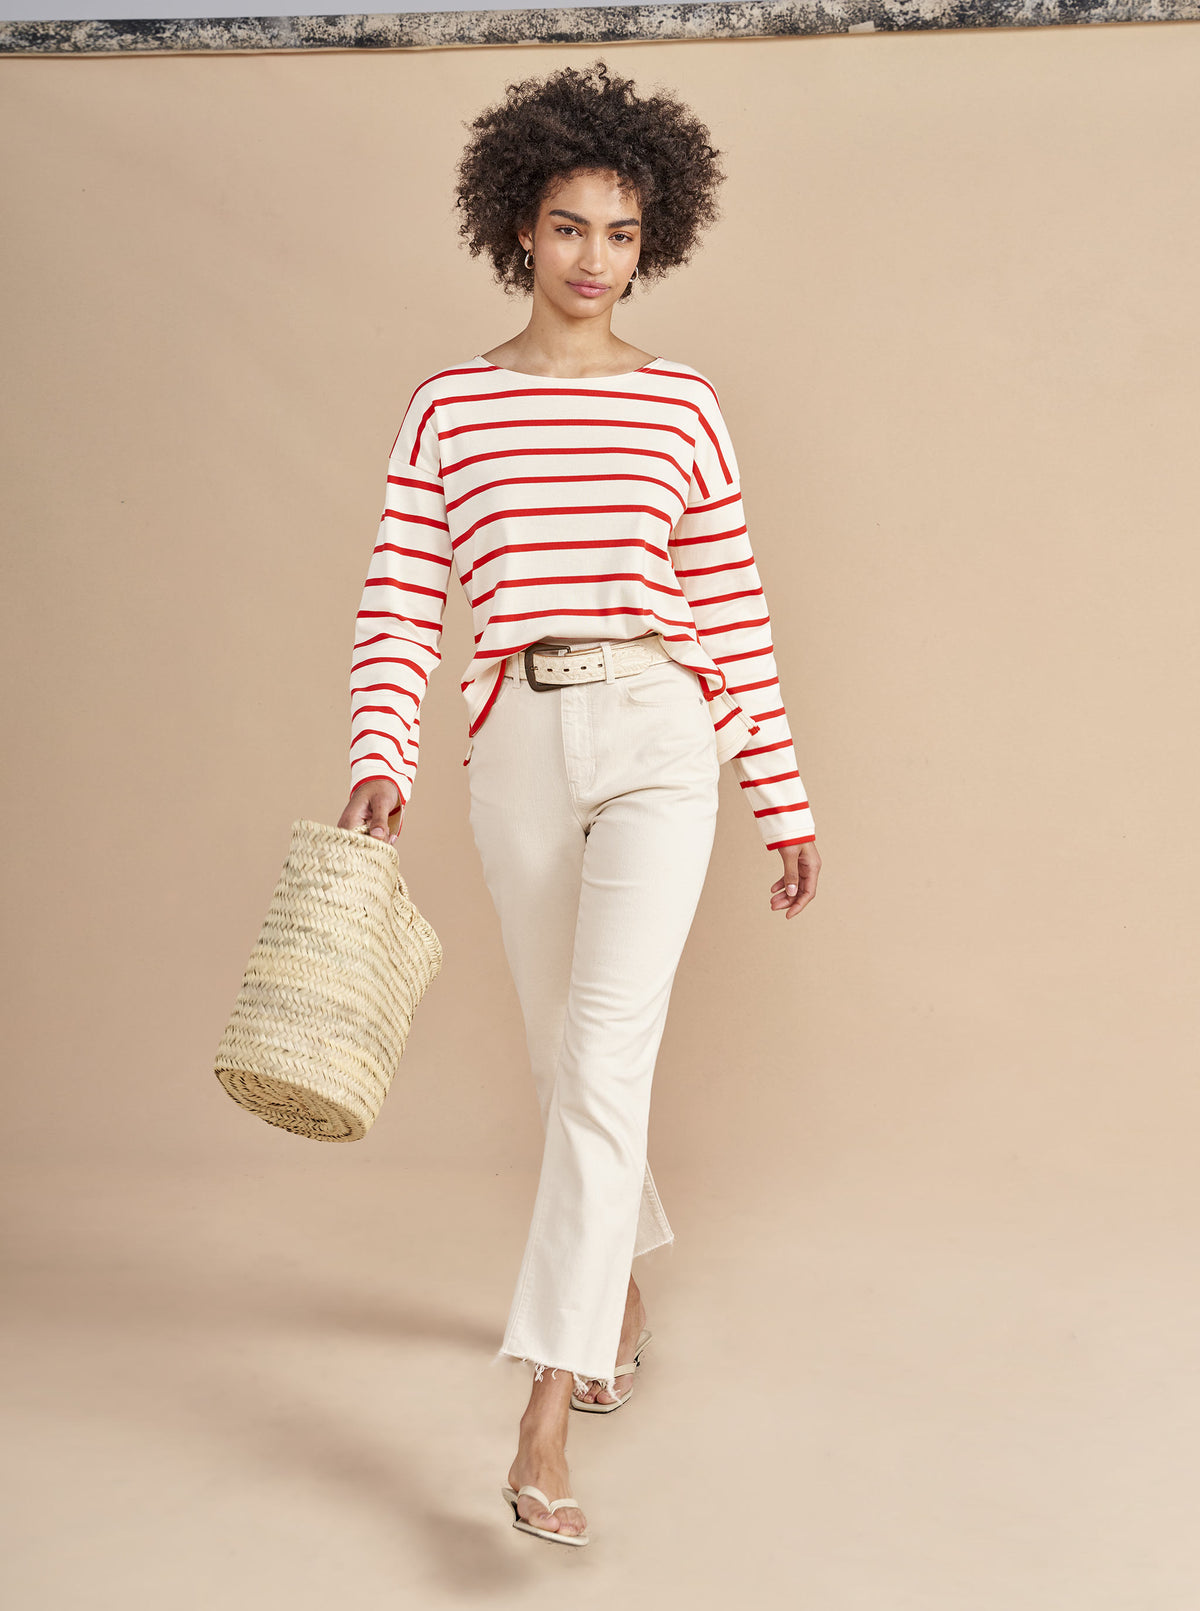 The epitome of quintessential Breton style, this long sleeve tee does it all in 100% super soft cream cotton with poppy stripes.